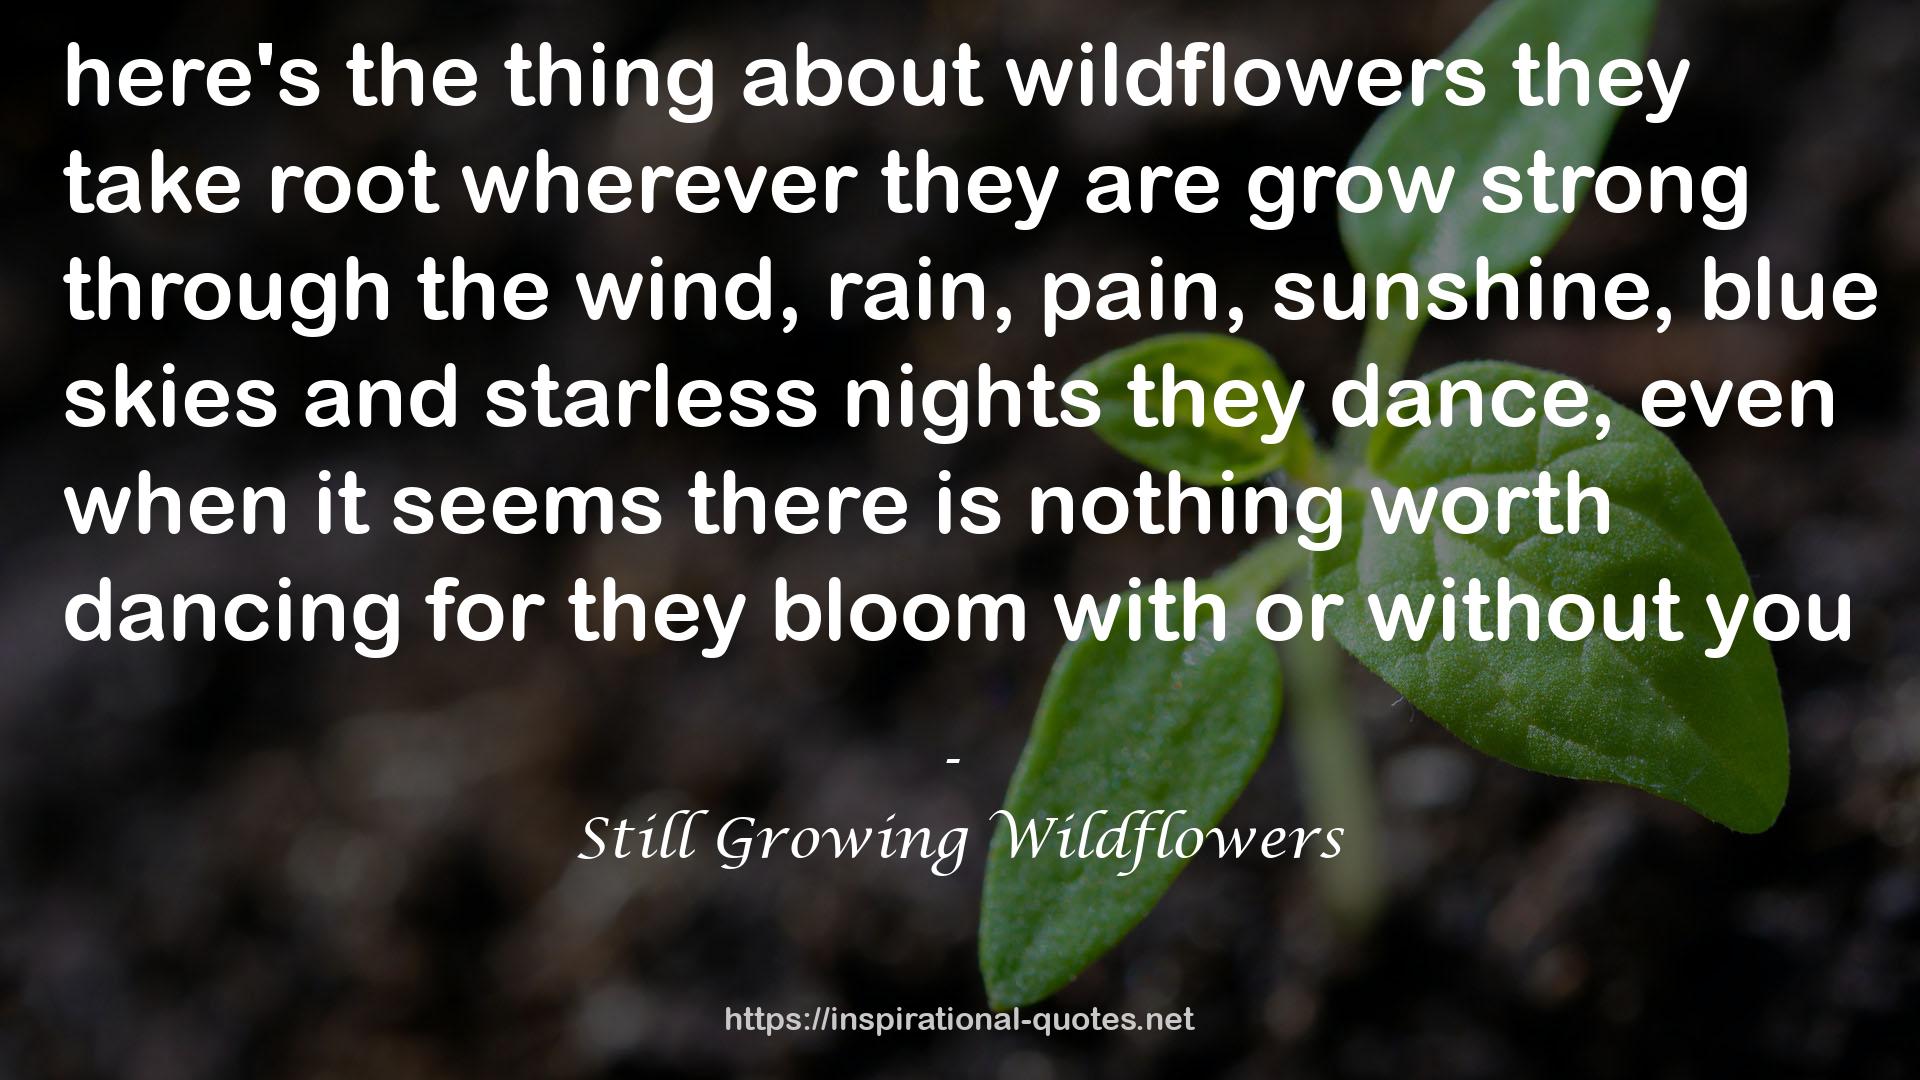 Still Growing Wildflowers QUOTES